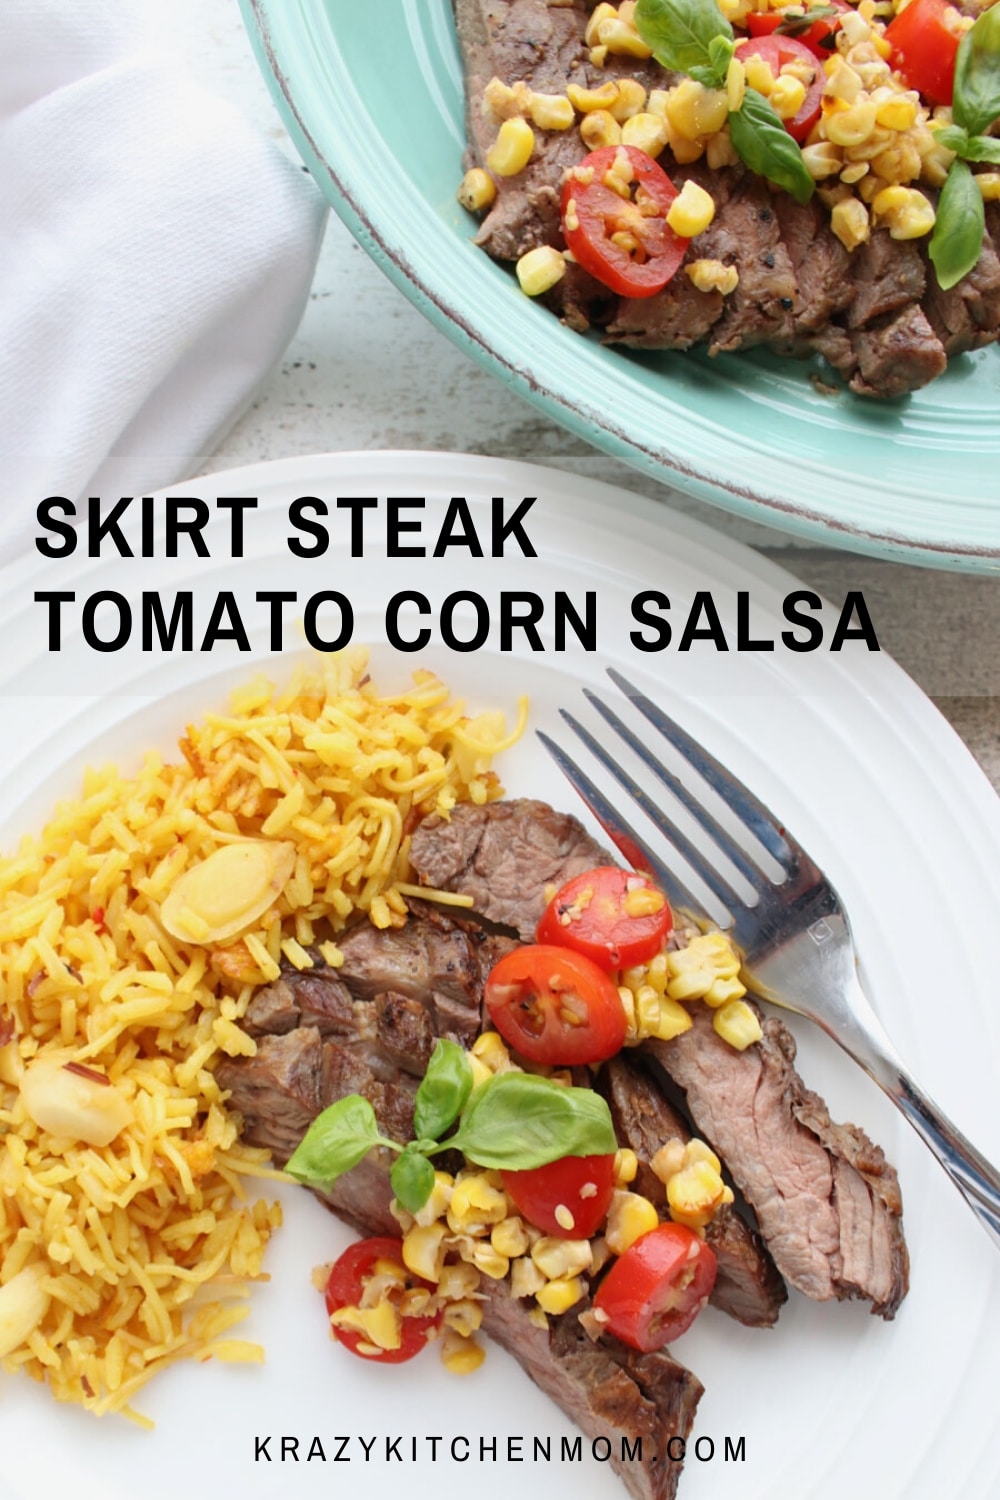 Skirt Steak with Tomato Corn Salsa - Perfectly cooked skirt steak topped with a sweet tangy tomato corn salsa. Serve it with rice for a delicious dinner. via @krazykitchenmom